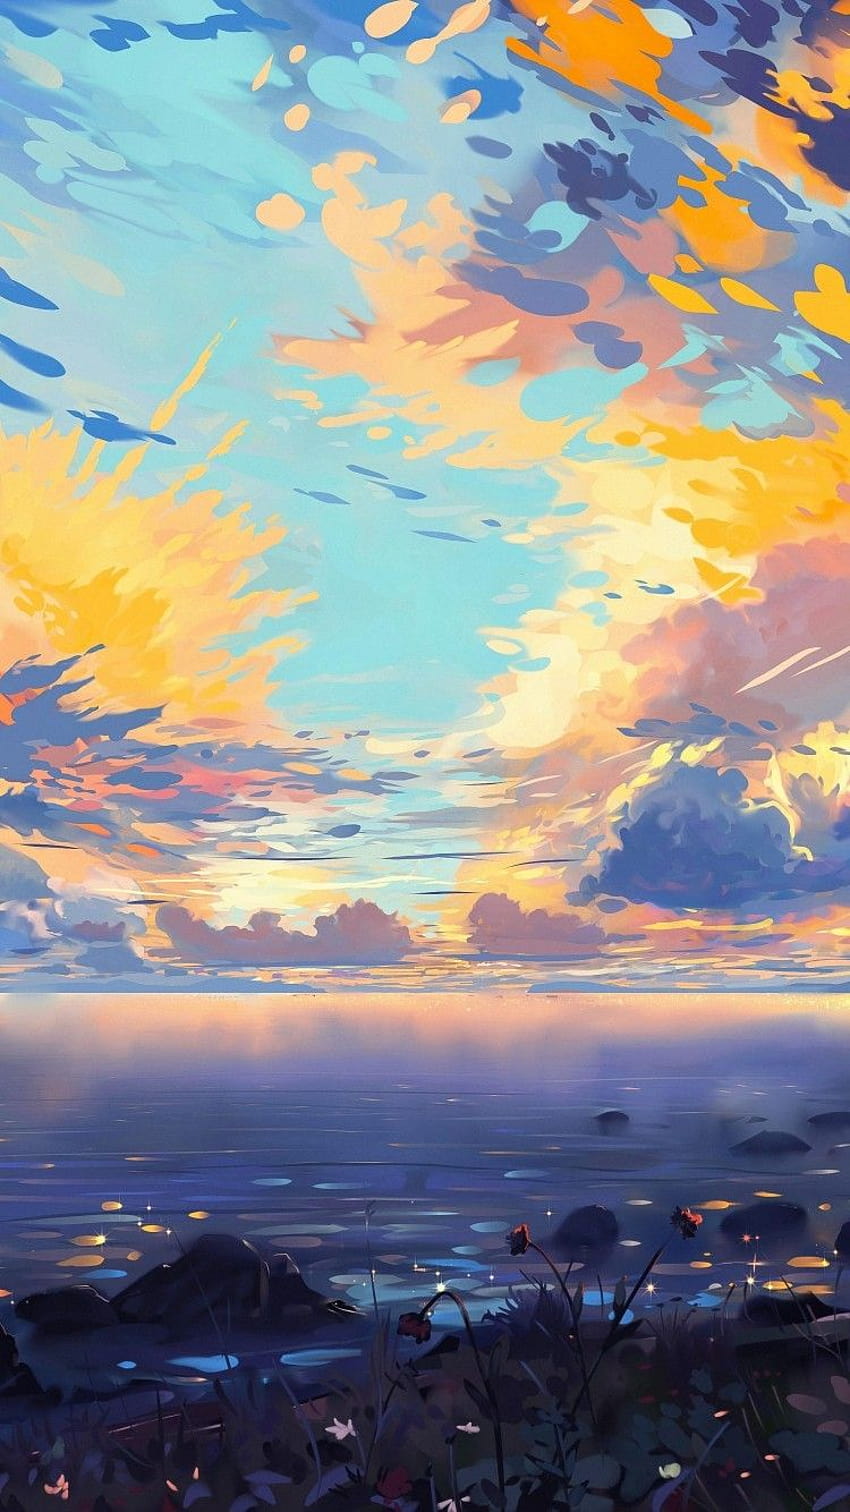 750x1334 Anime Landscape, Sea, Ships, Colorful, Clouds, Scenic, Tree, Horizon for iPhone 7, iPhone 6, anime sea HD phone wallpaper